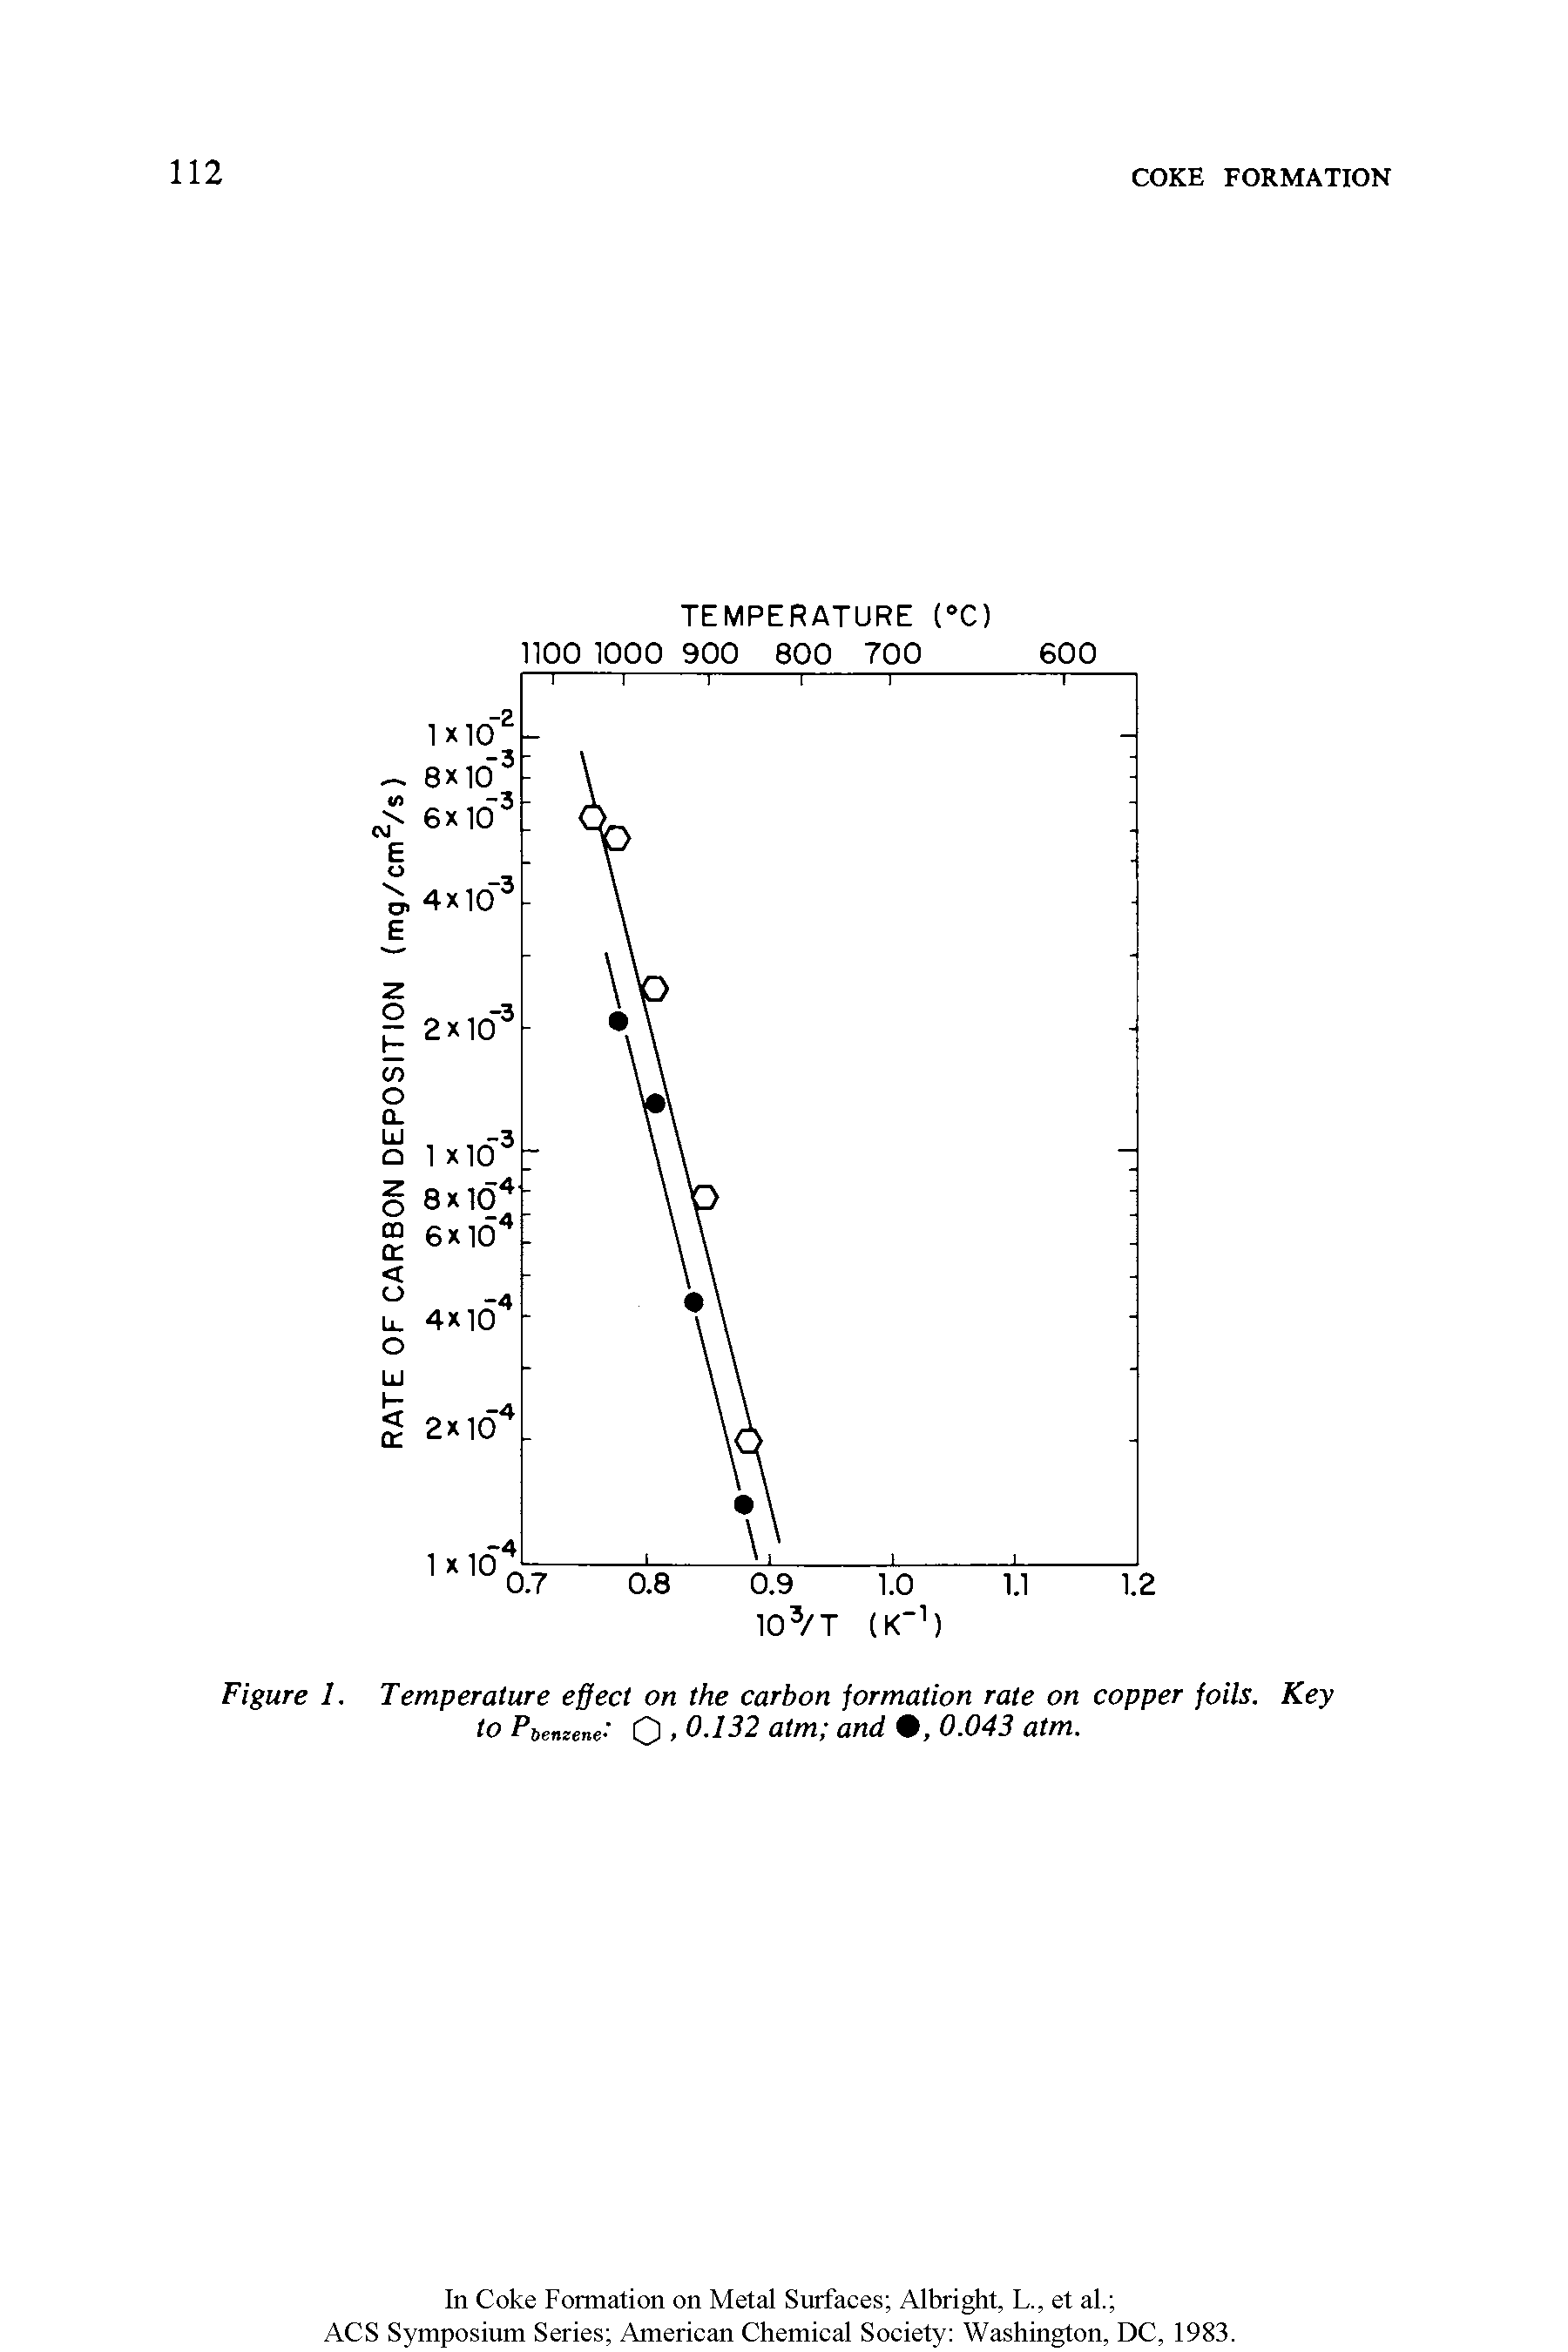 Figure 1. Temperature effect on the carbon formation rate on copper foils. Key to Pienzene- O > 0.132 atm and , 0.043 atm.